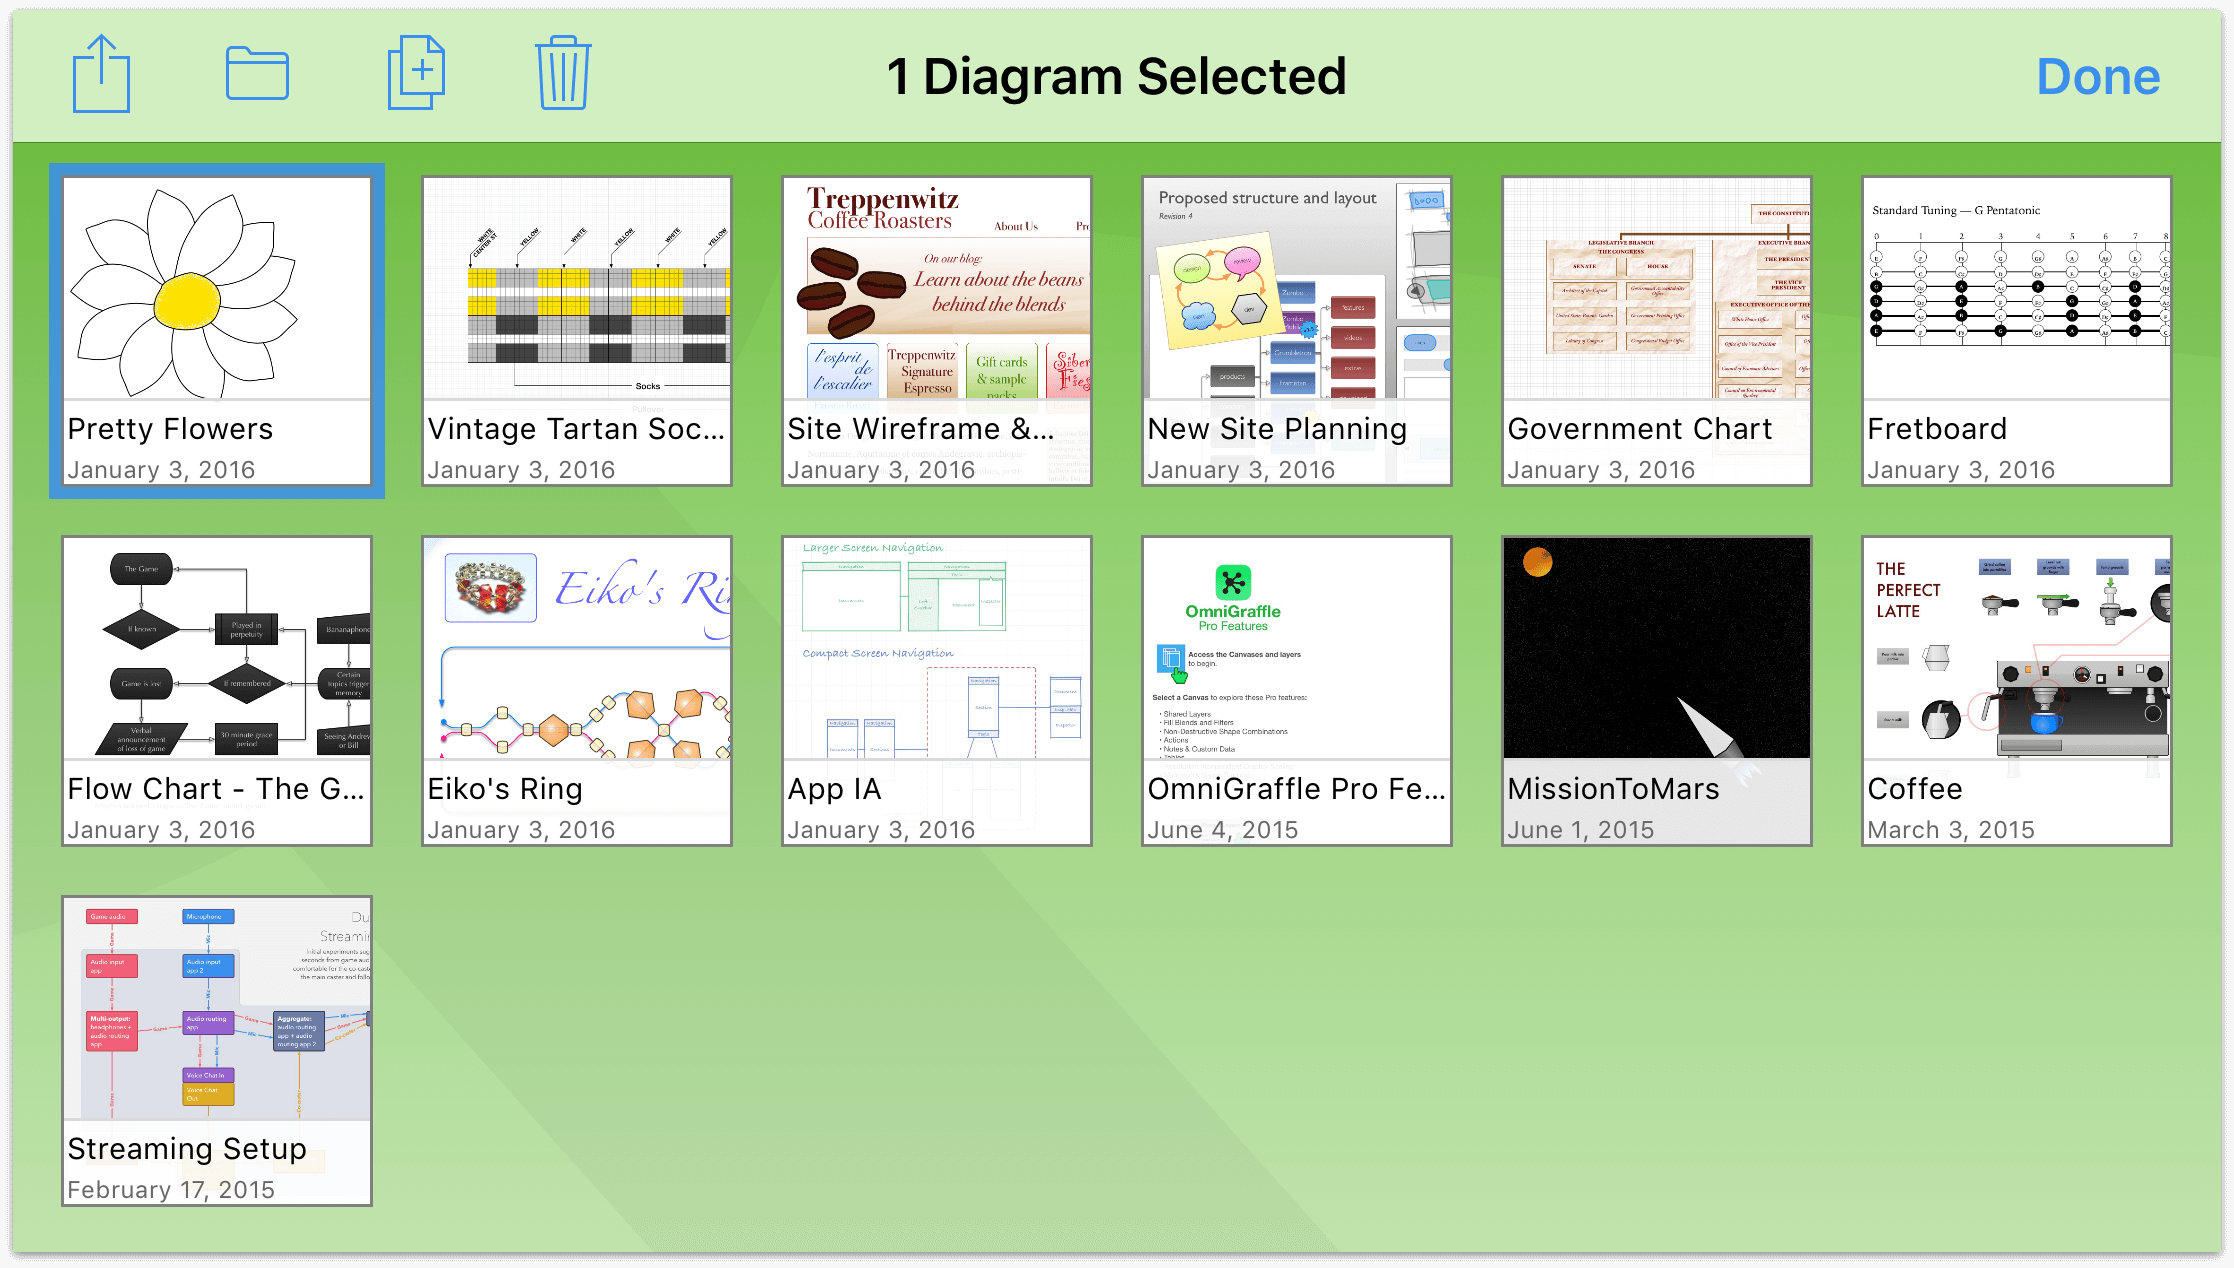 Selected files are highlighted with a blue border